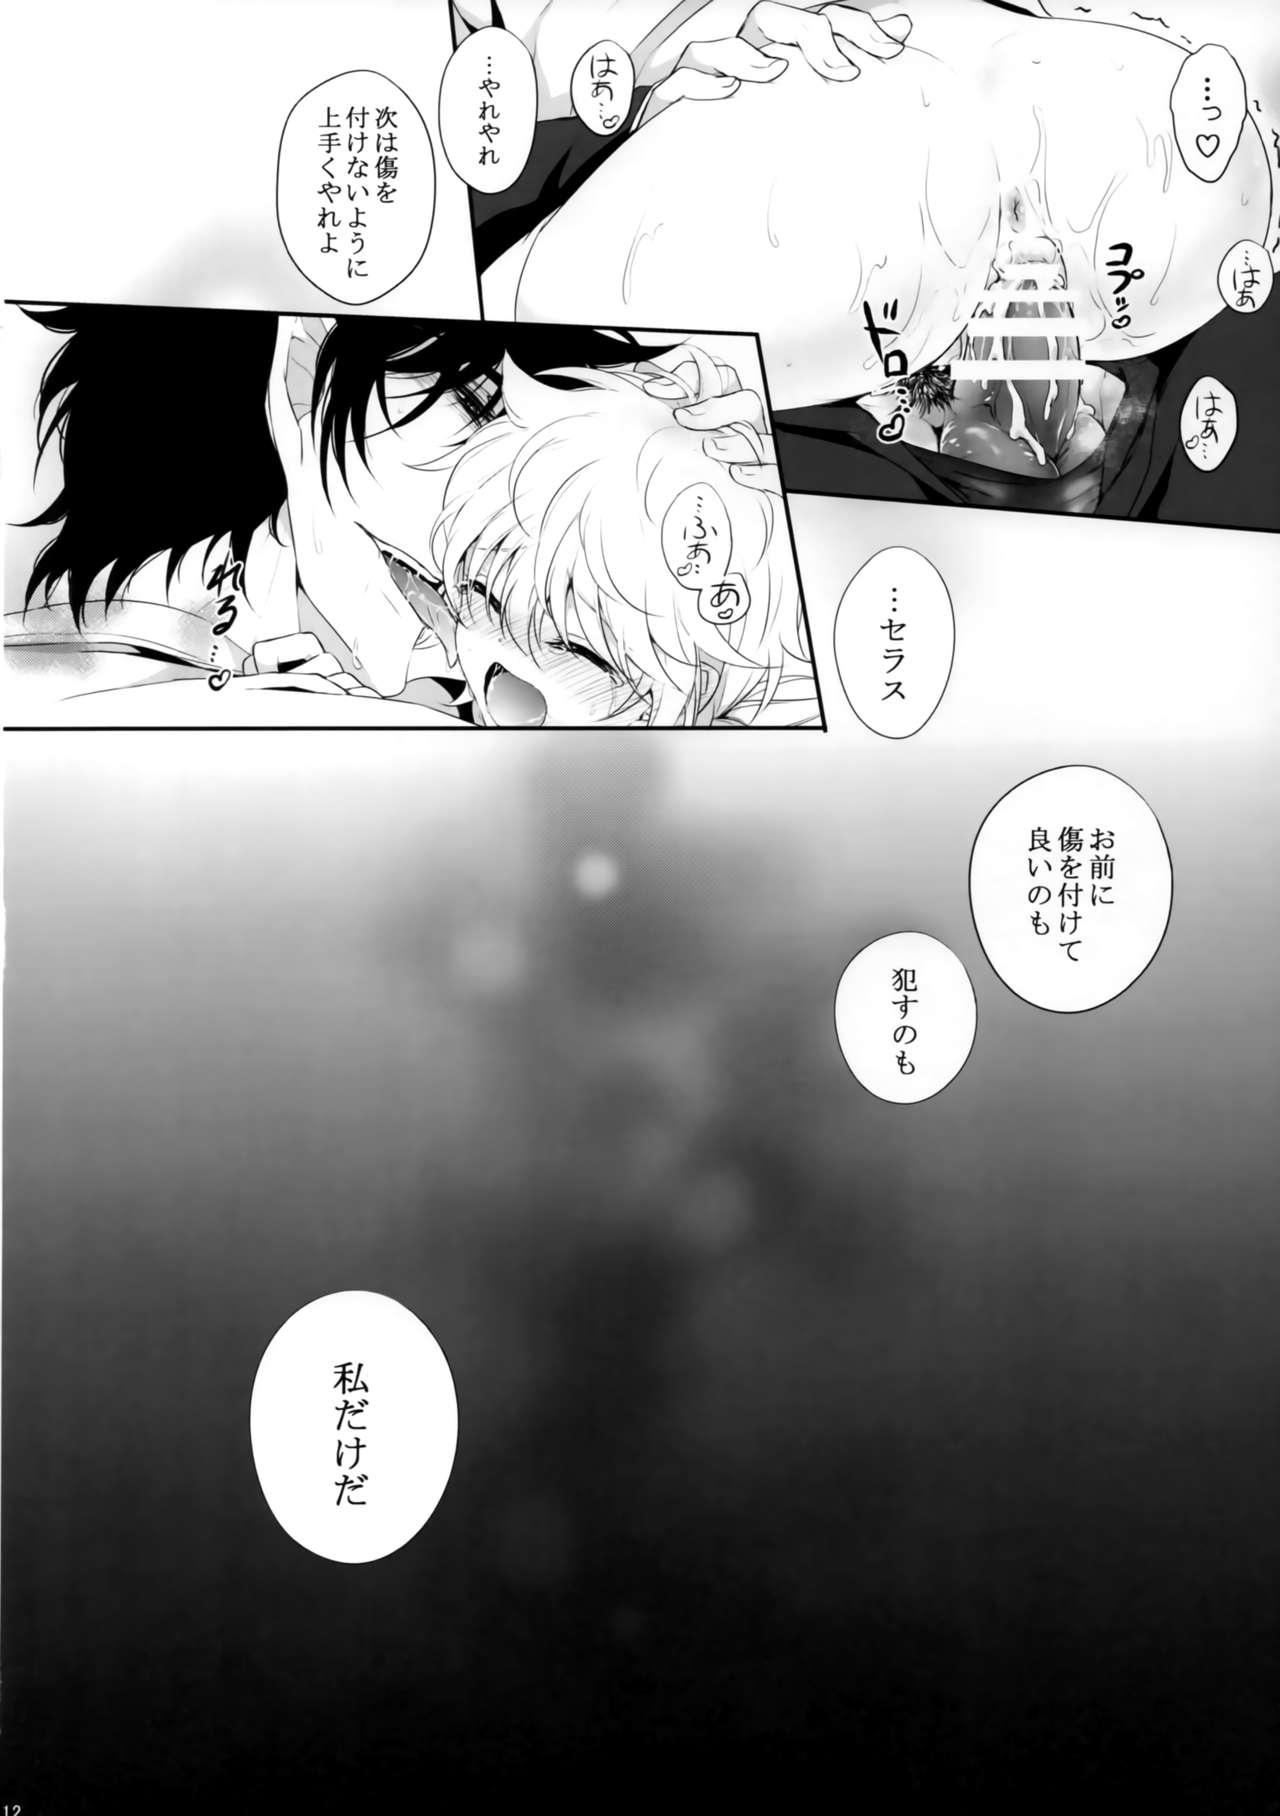 Girlfriend Exclusive Treatment - Hellsing Celeb - Page 11